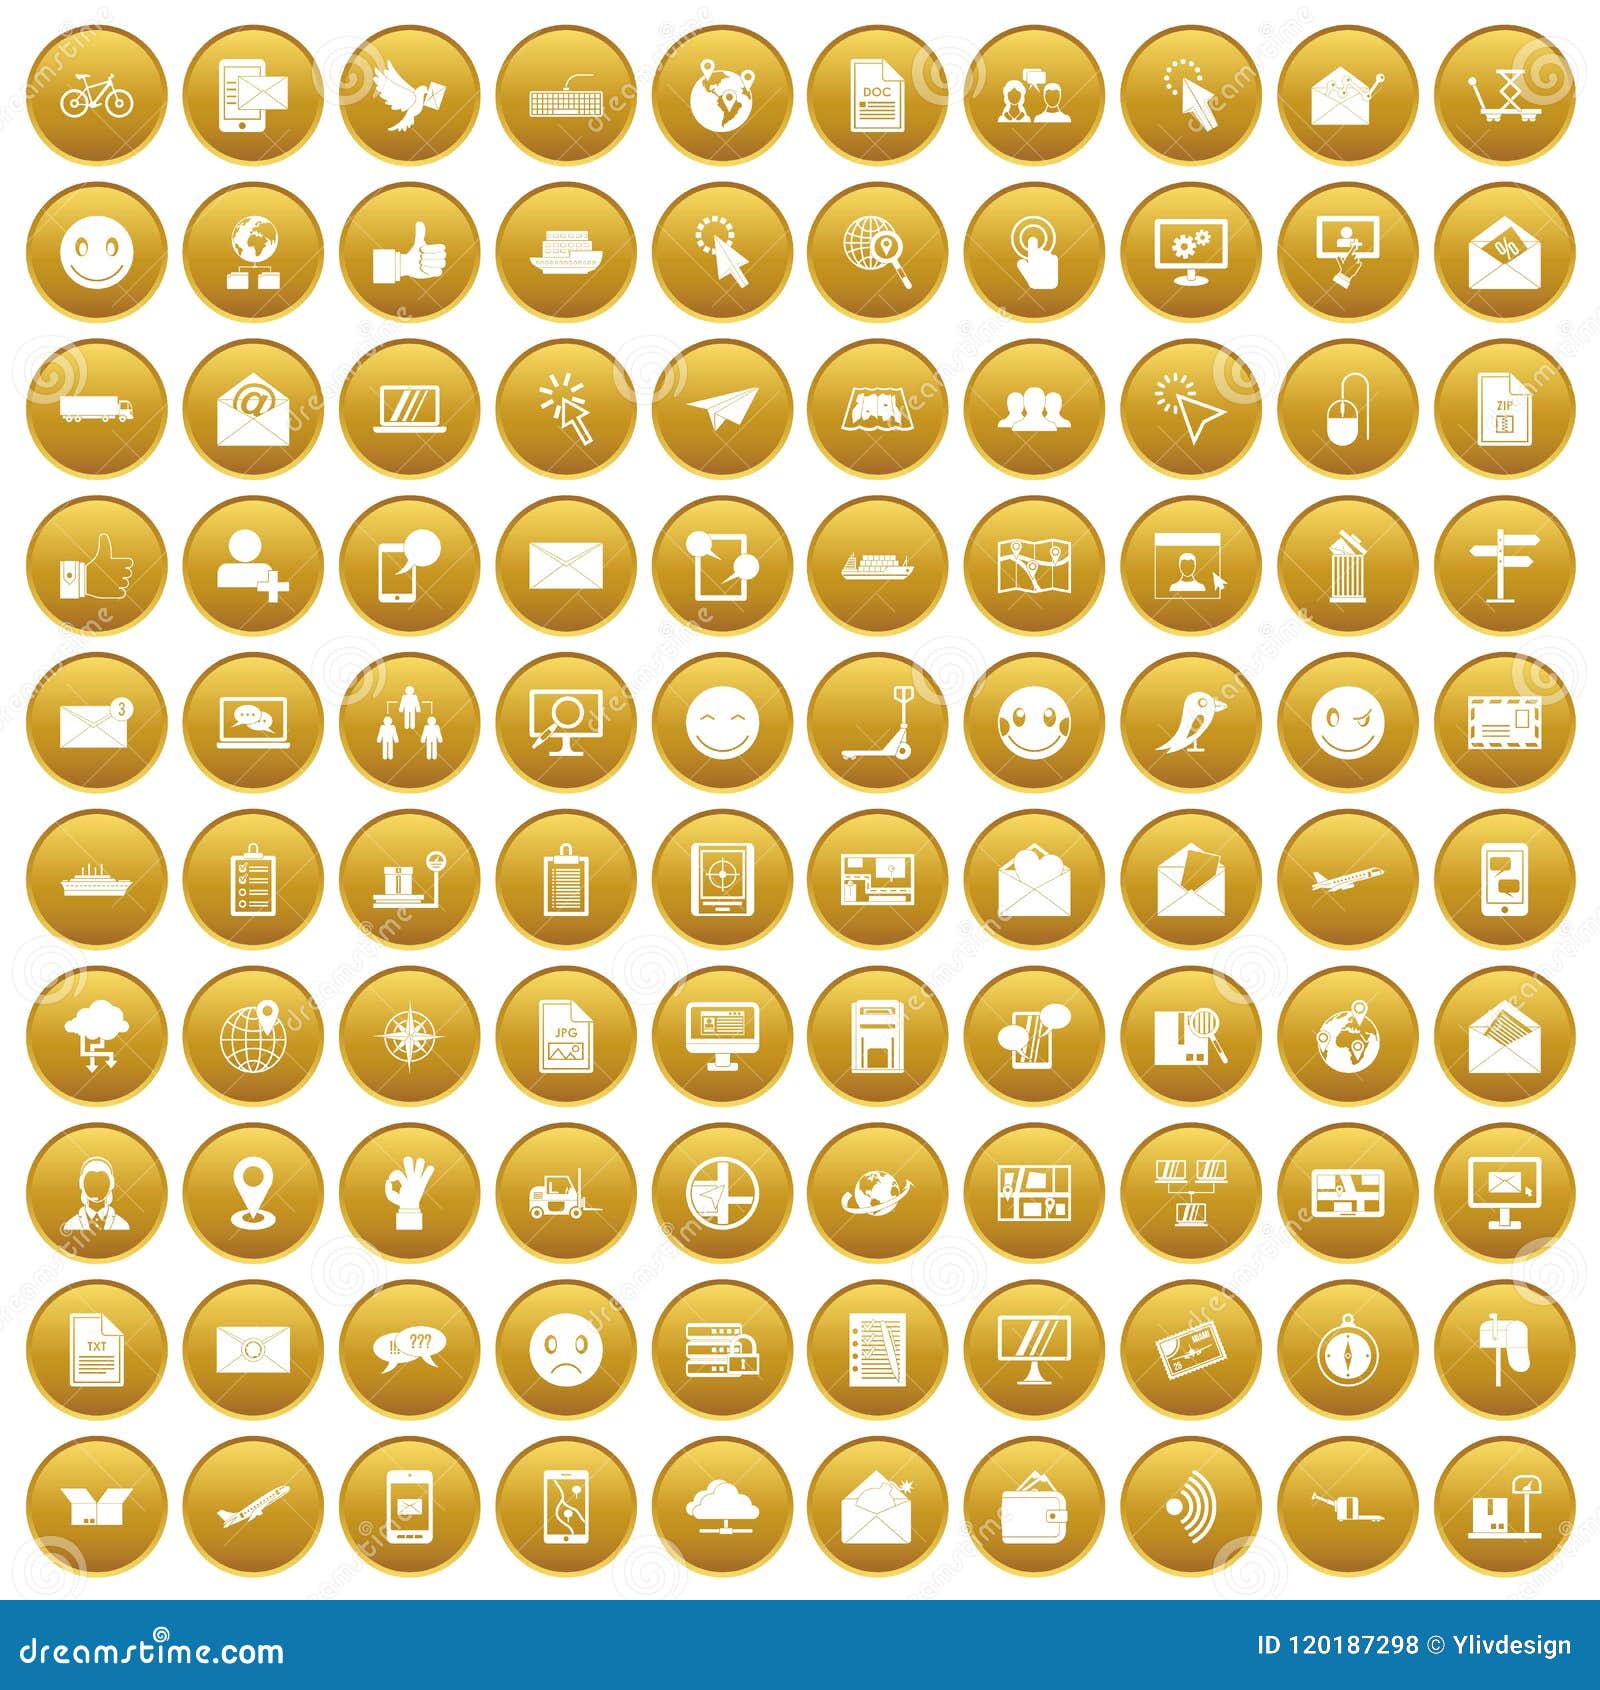 100 mail icons set gold stock vector. Illustration of gold - 120187298